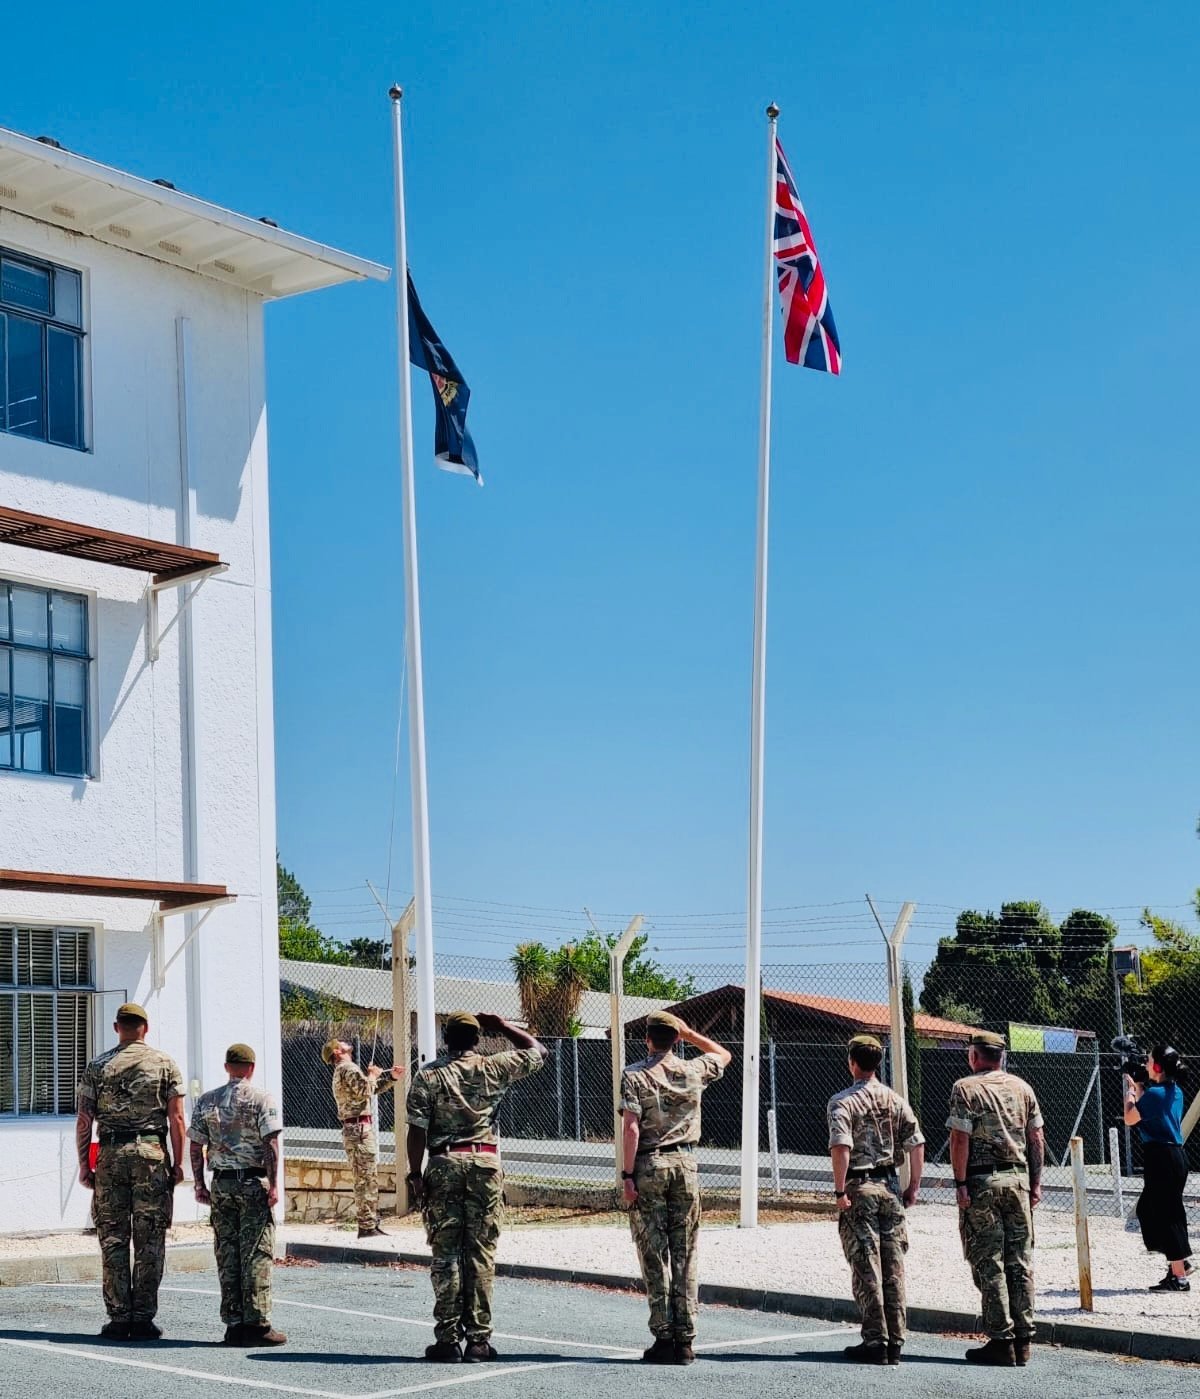 The 1st Battalion of The Duke of Lancaster’s Regiment is leaving Dale Barracks in Chester to take on the role of Regional Standby Battalion (RSB) in Cyprus.